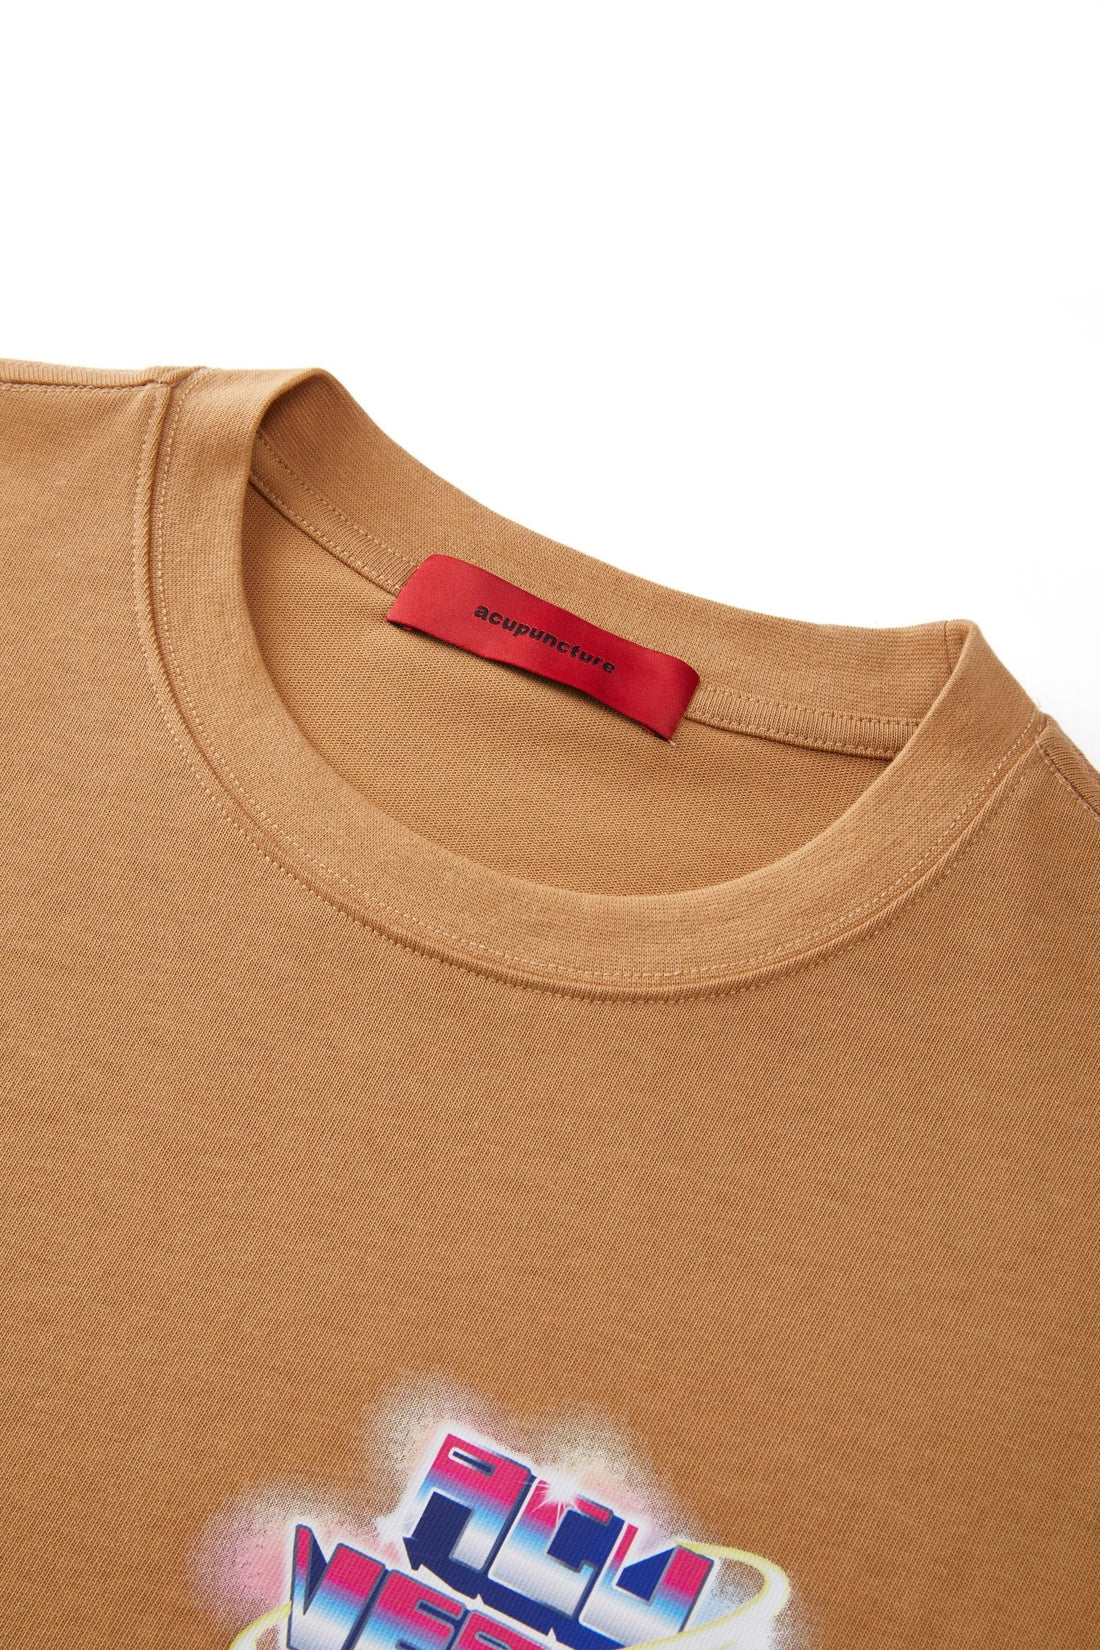 VERSE T-SHIRT BROWN Acupuncture